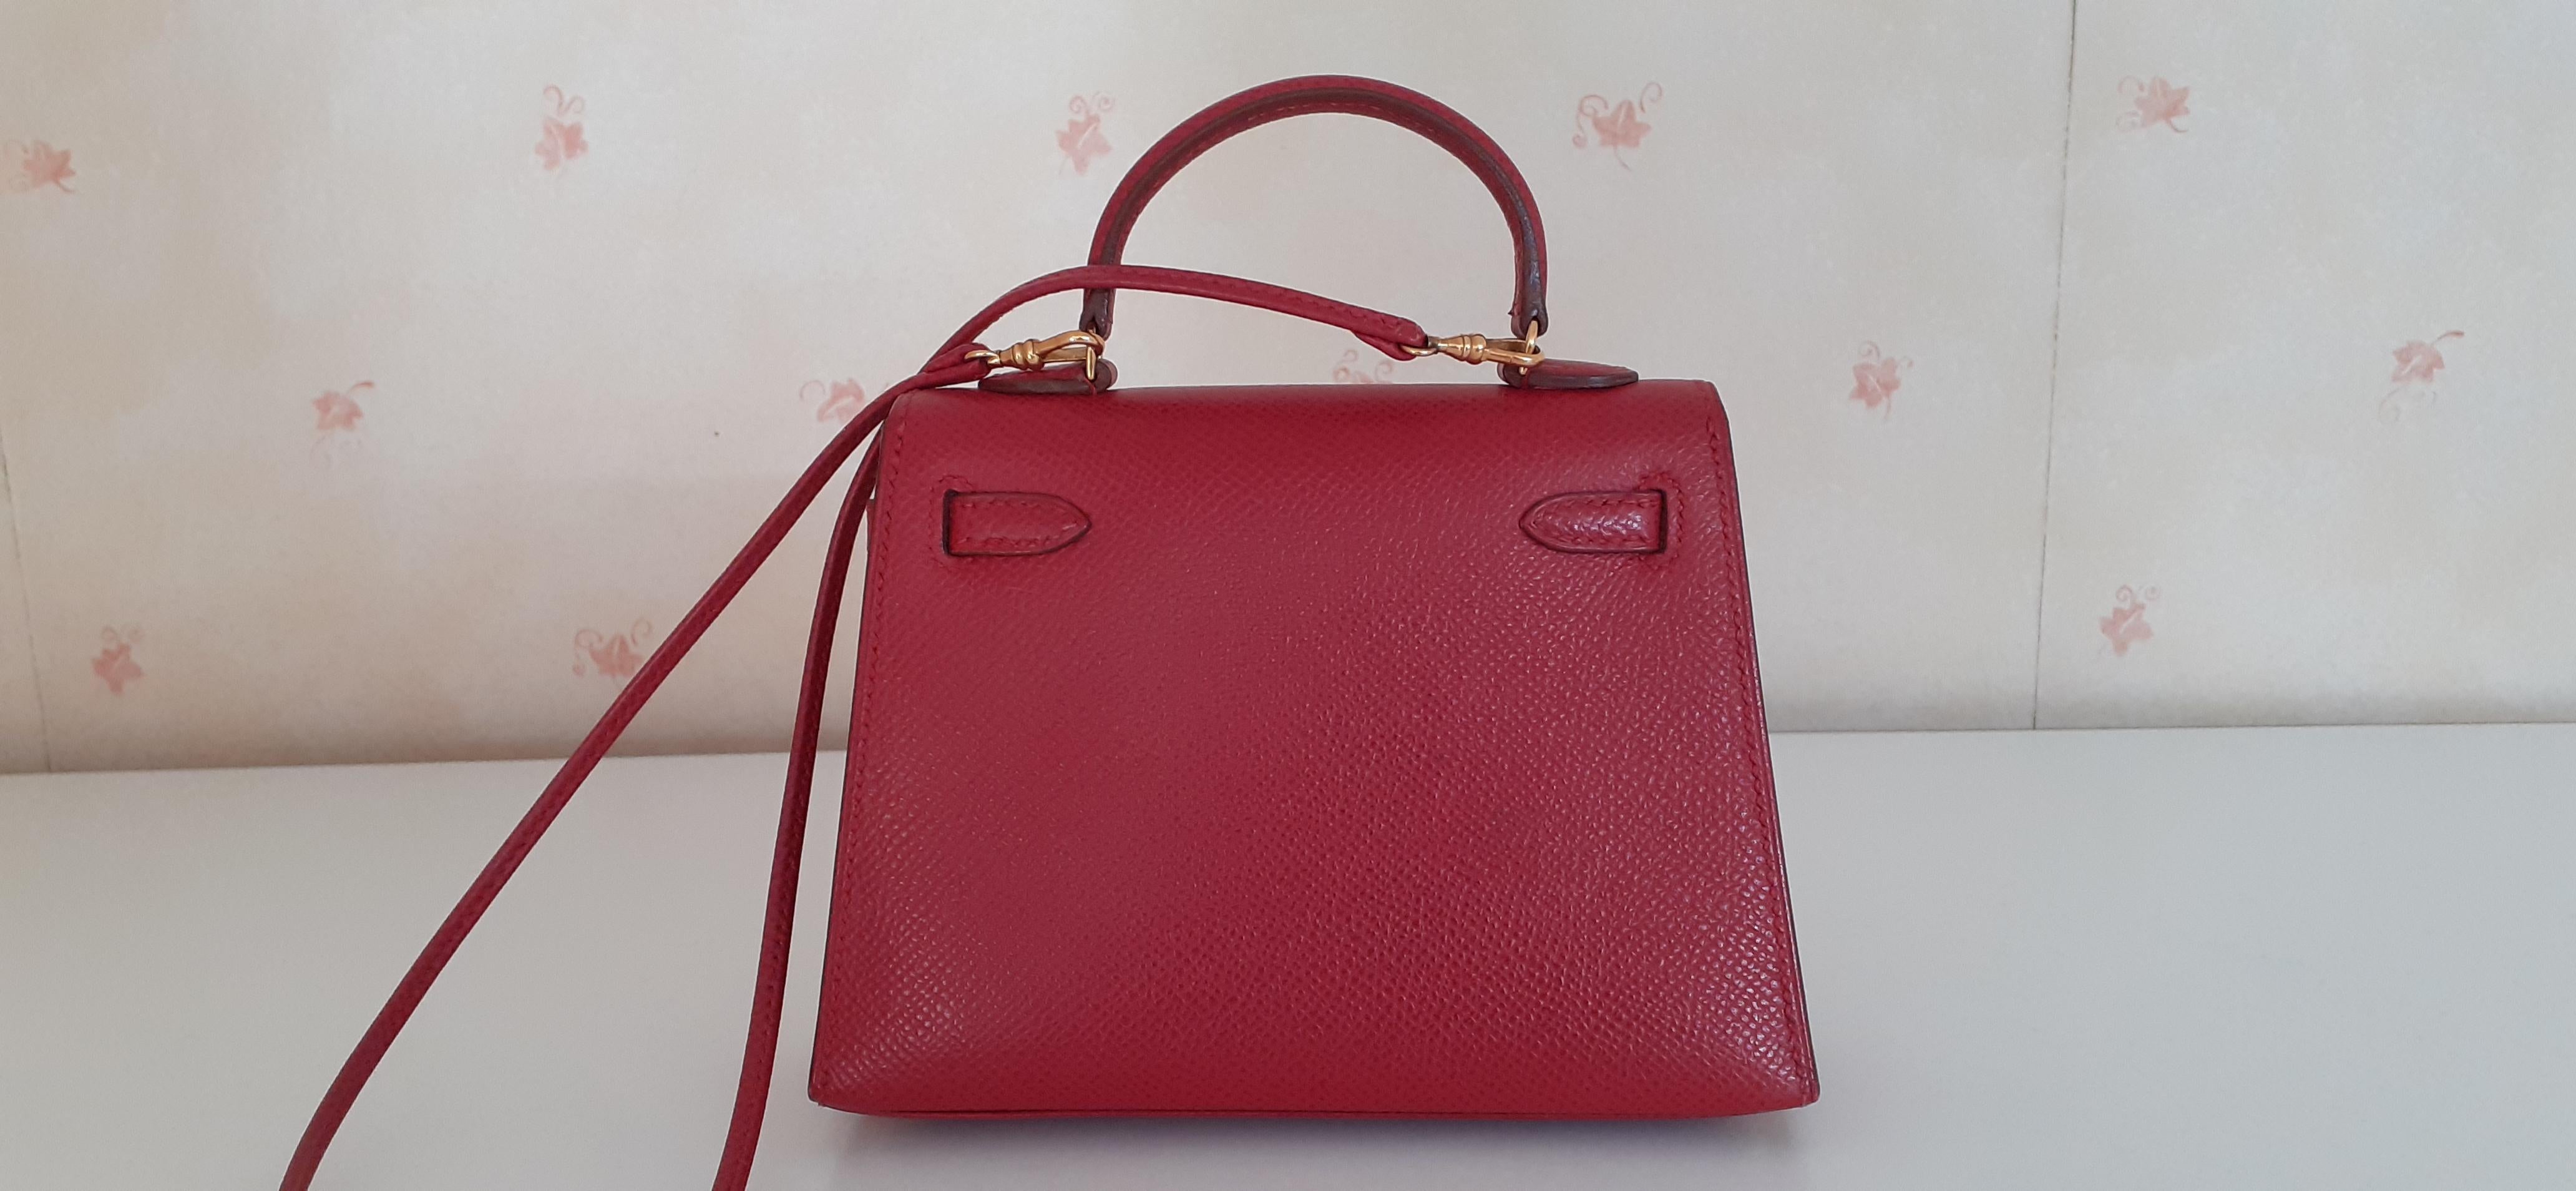 Exceptional Hermès Vintage Micro Kelly 15 cm Sellier Bag Red Leather Gold Hdw For Sale 1